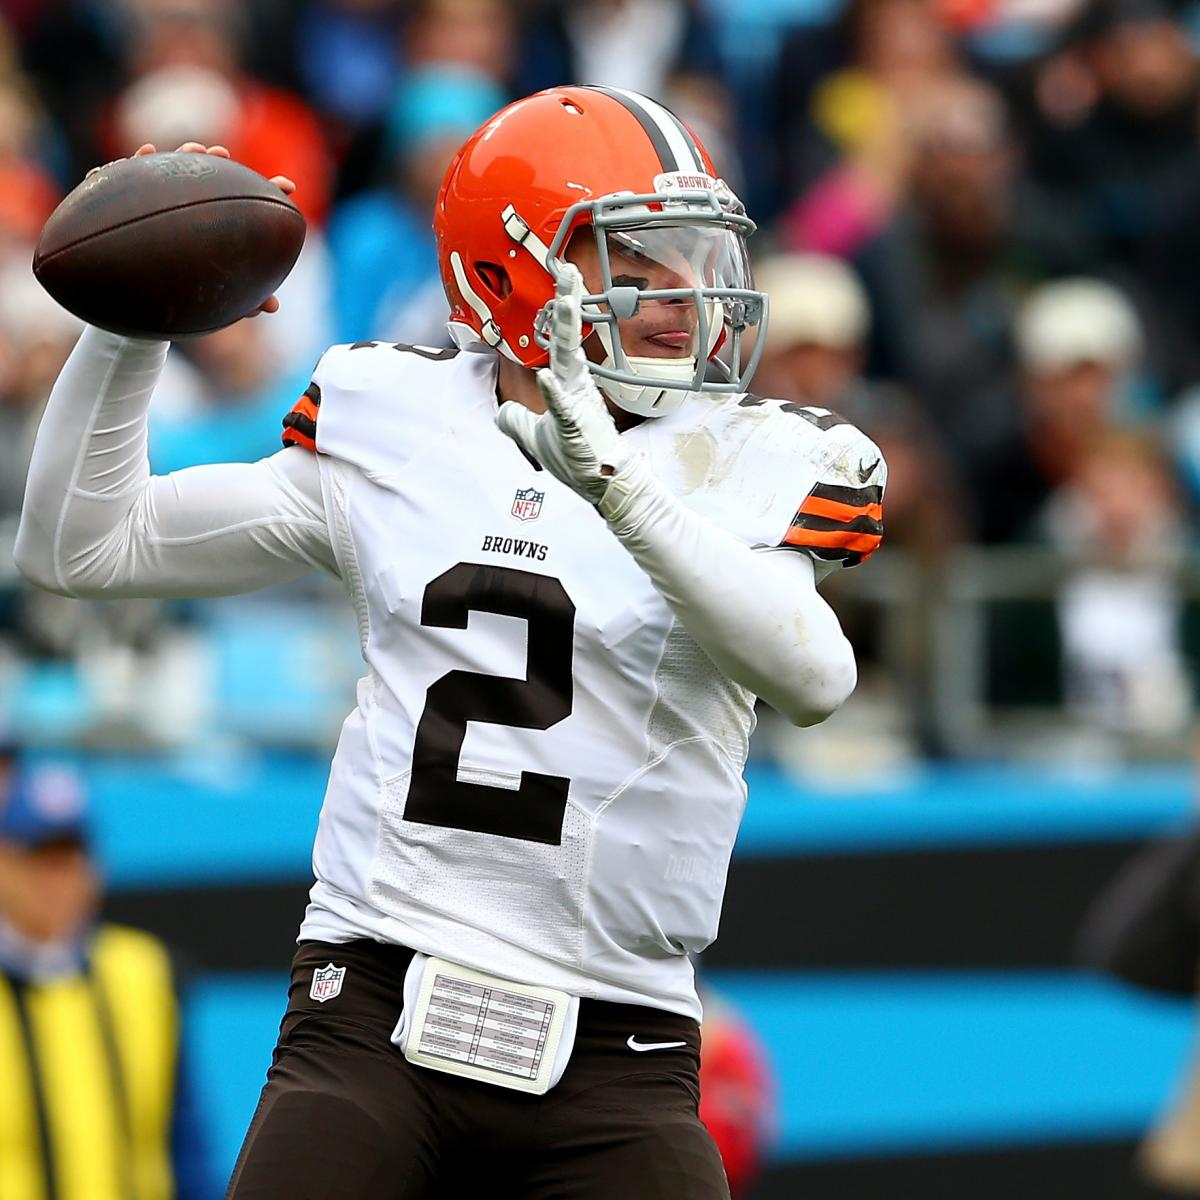 Johnny Manziel Not Viewed as Browns Starting QB Heading into Free Agency, Draft